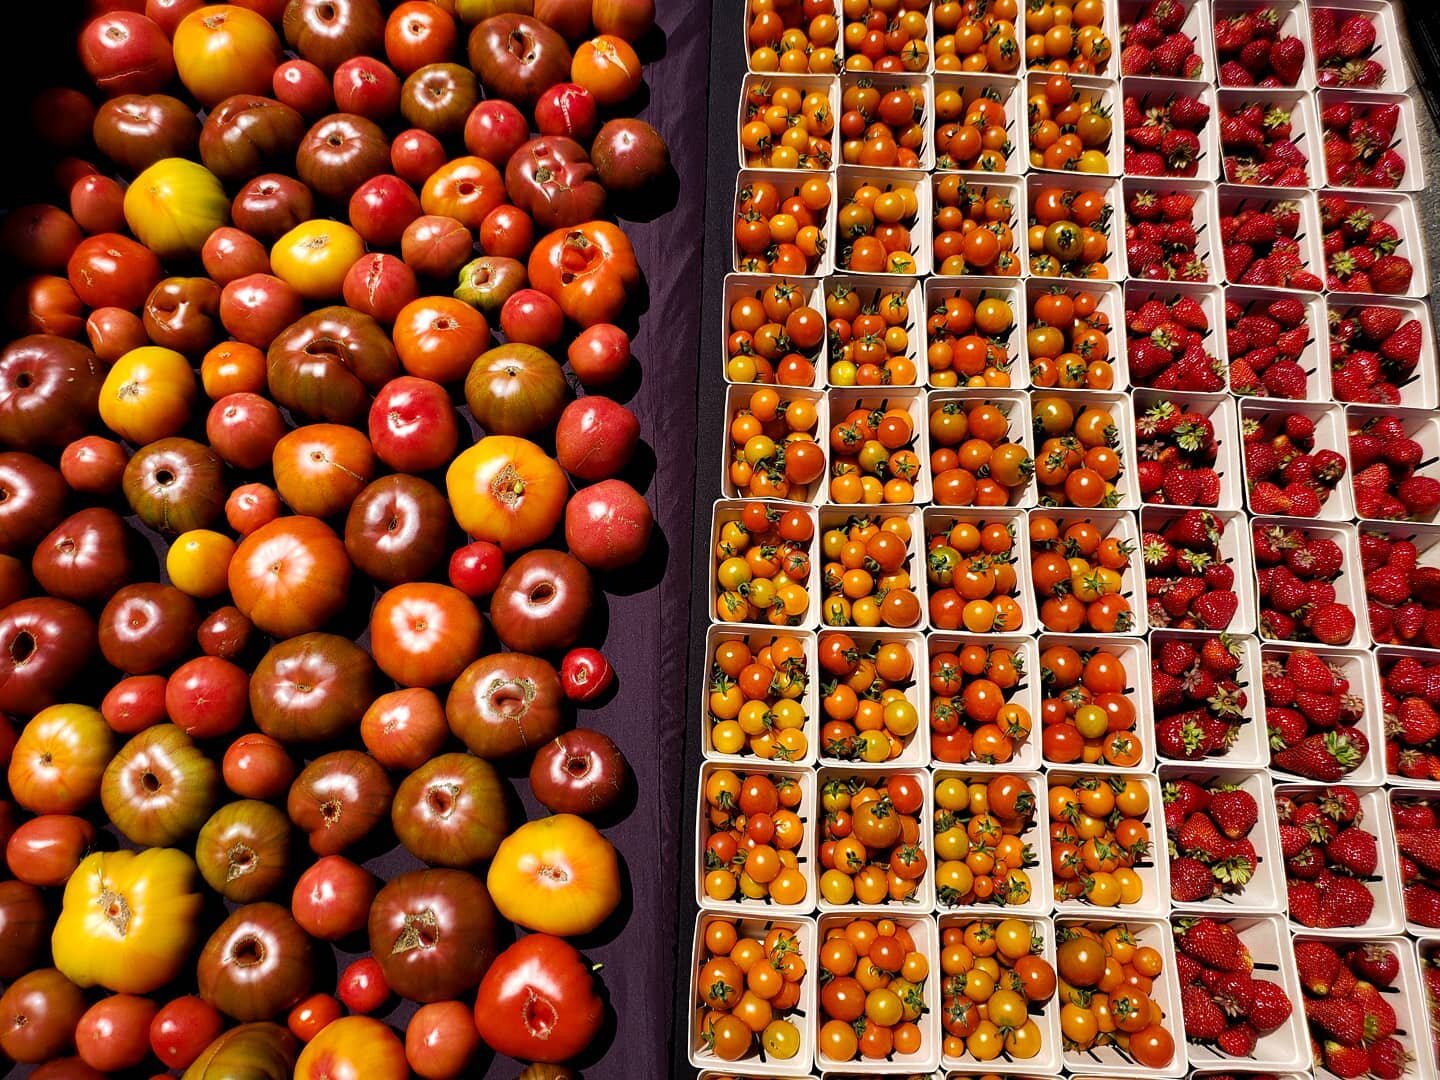 Doesn't get much better than this beautiful array of color 🥰🍅🍓